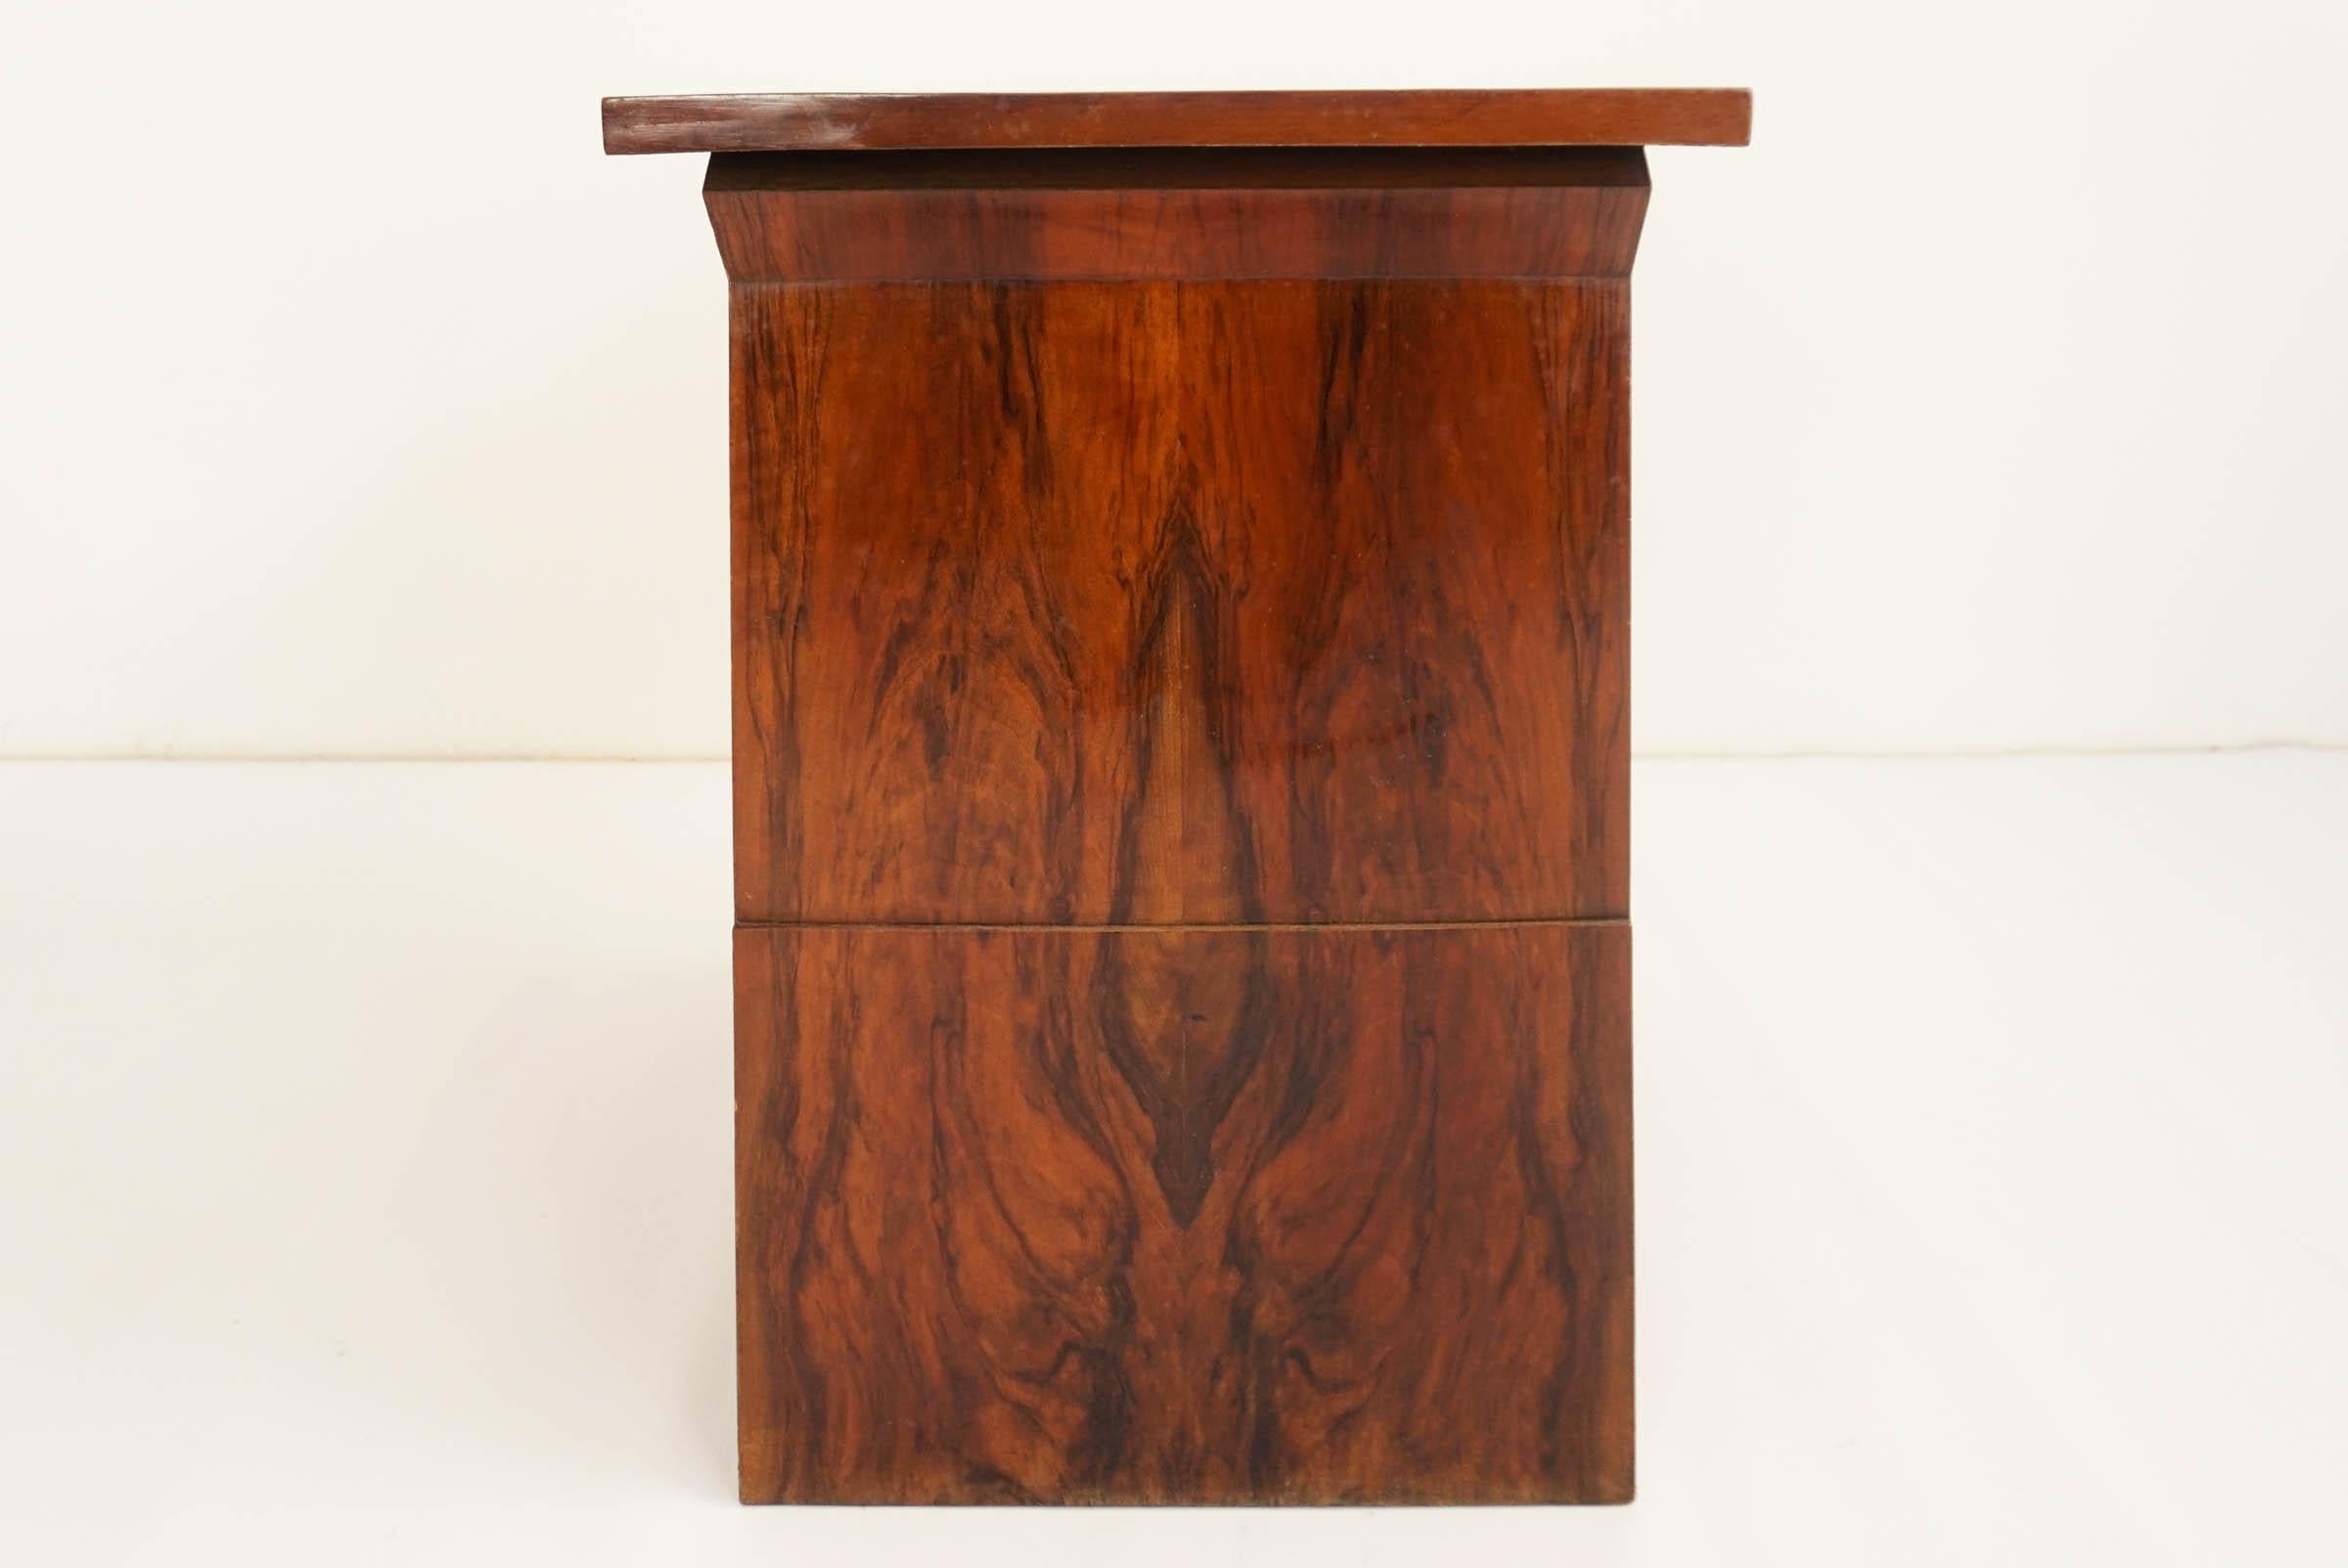 Italian Architectural Art Deco Entrance Stools in Walnut Root 6